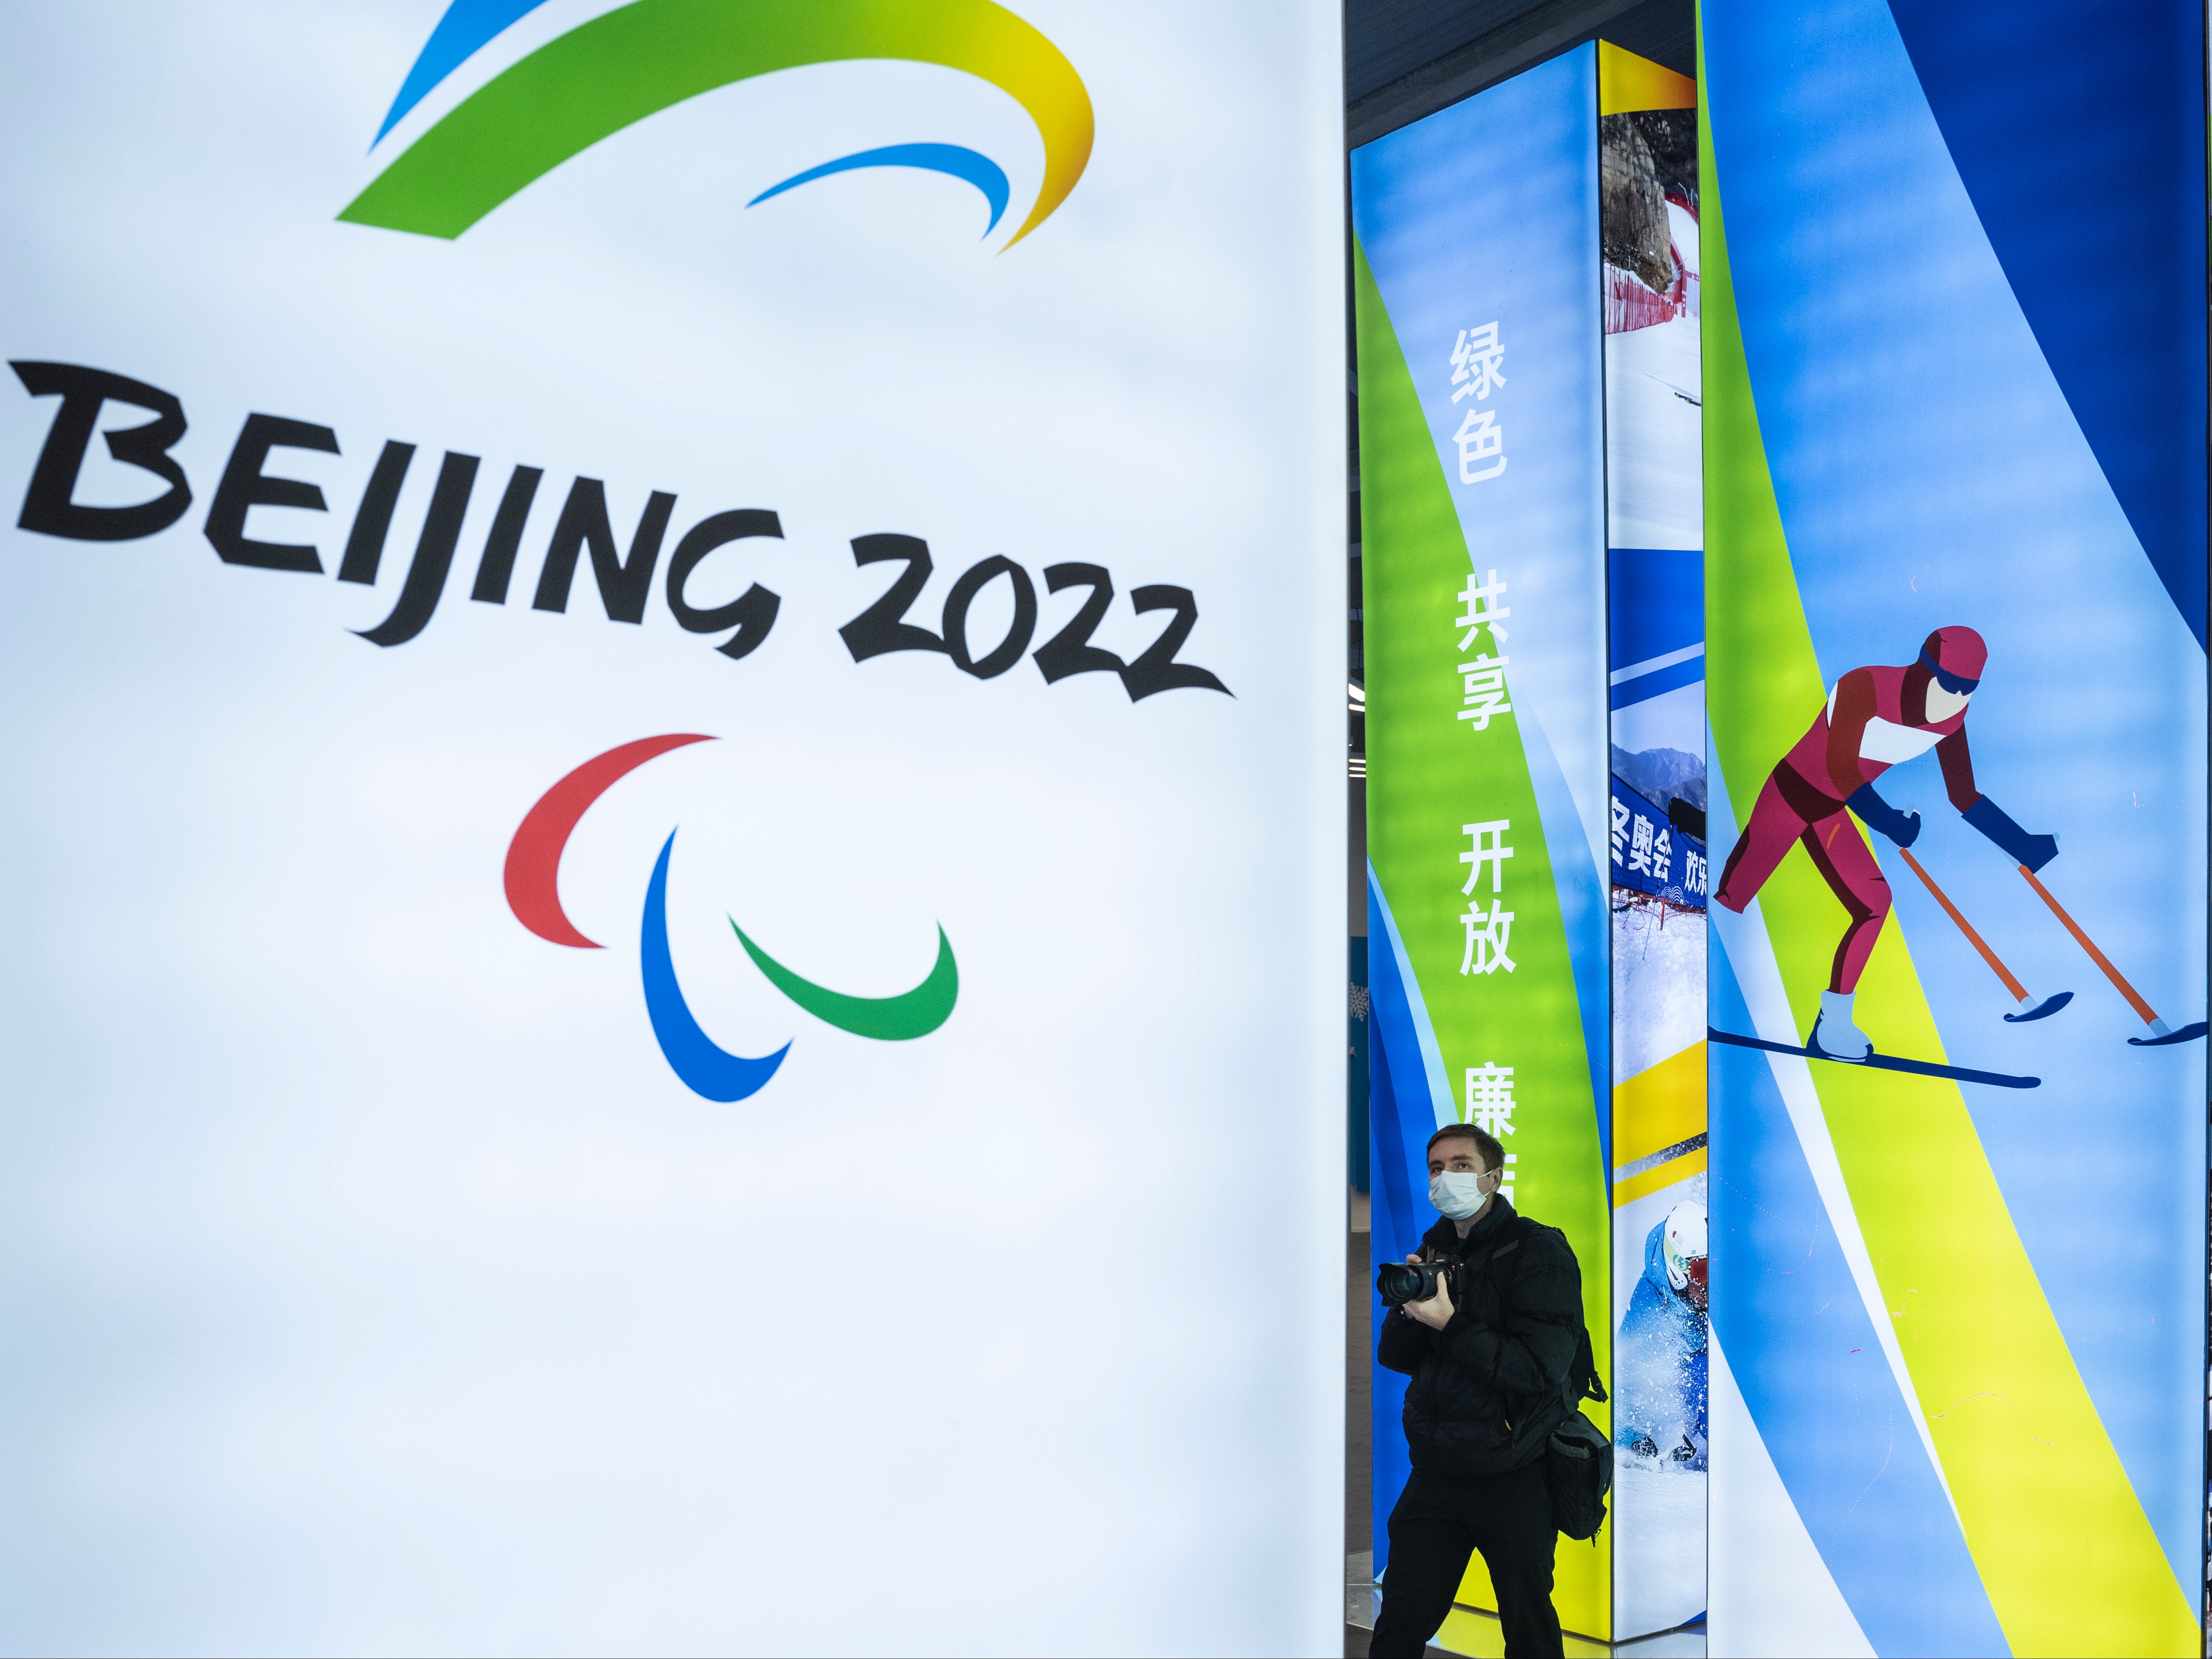 A general view of the exhibition centre for the Beijing 2022 Winter Olympics